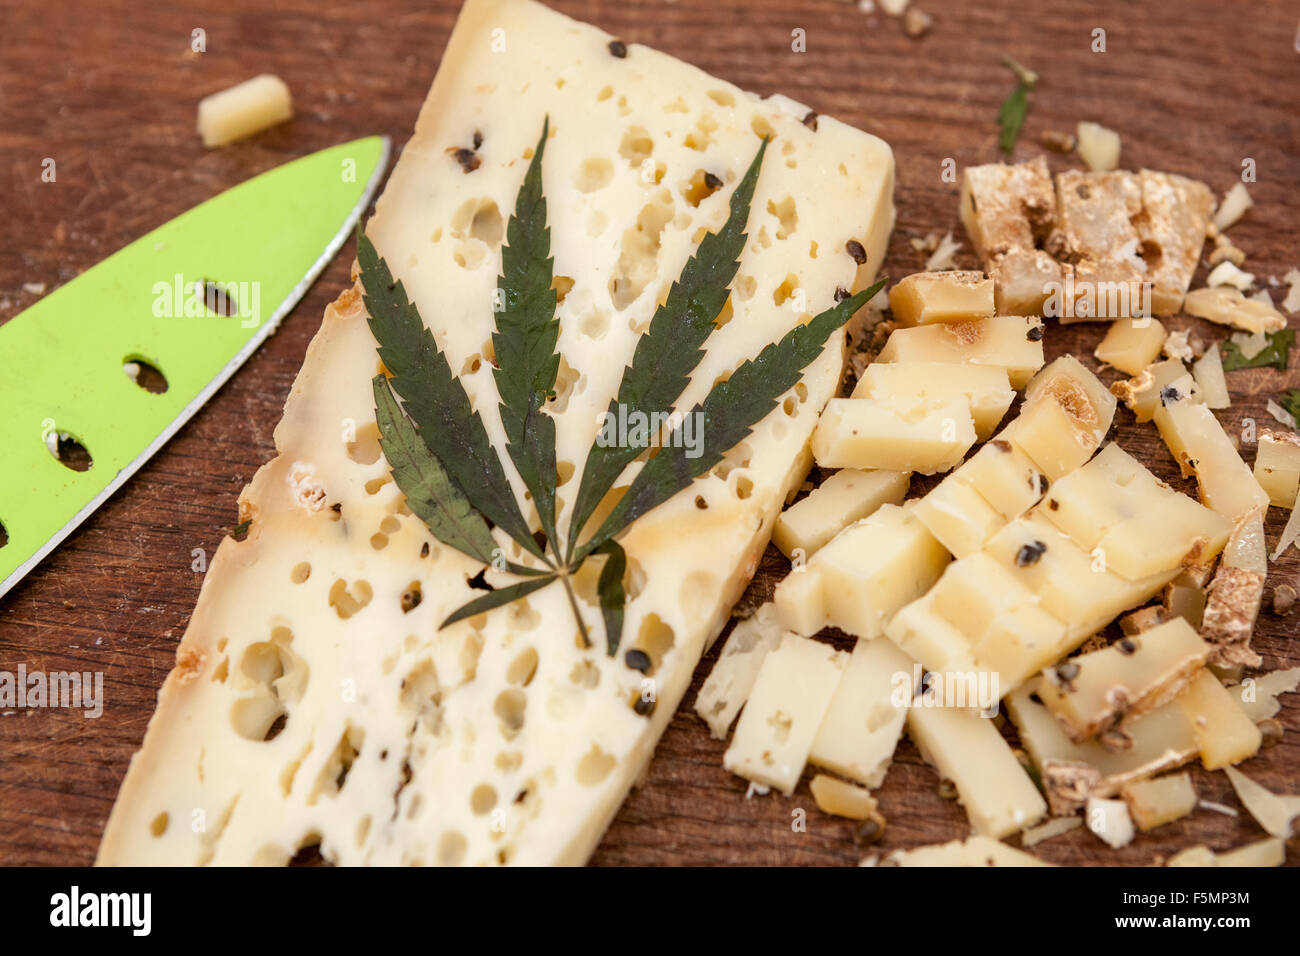 Ripened cheese on board cannabis food, leaf herb edible product, cheese board Stock Photo